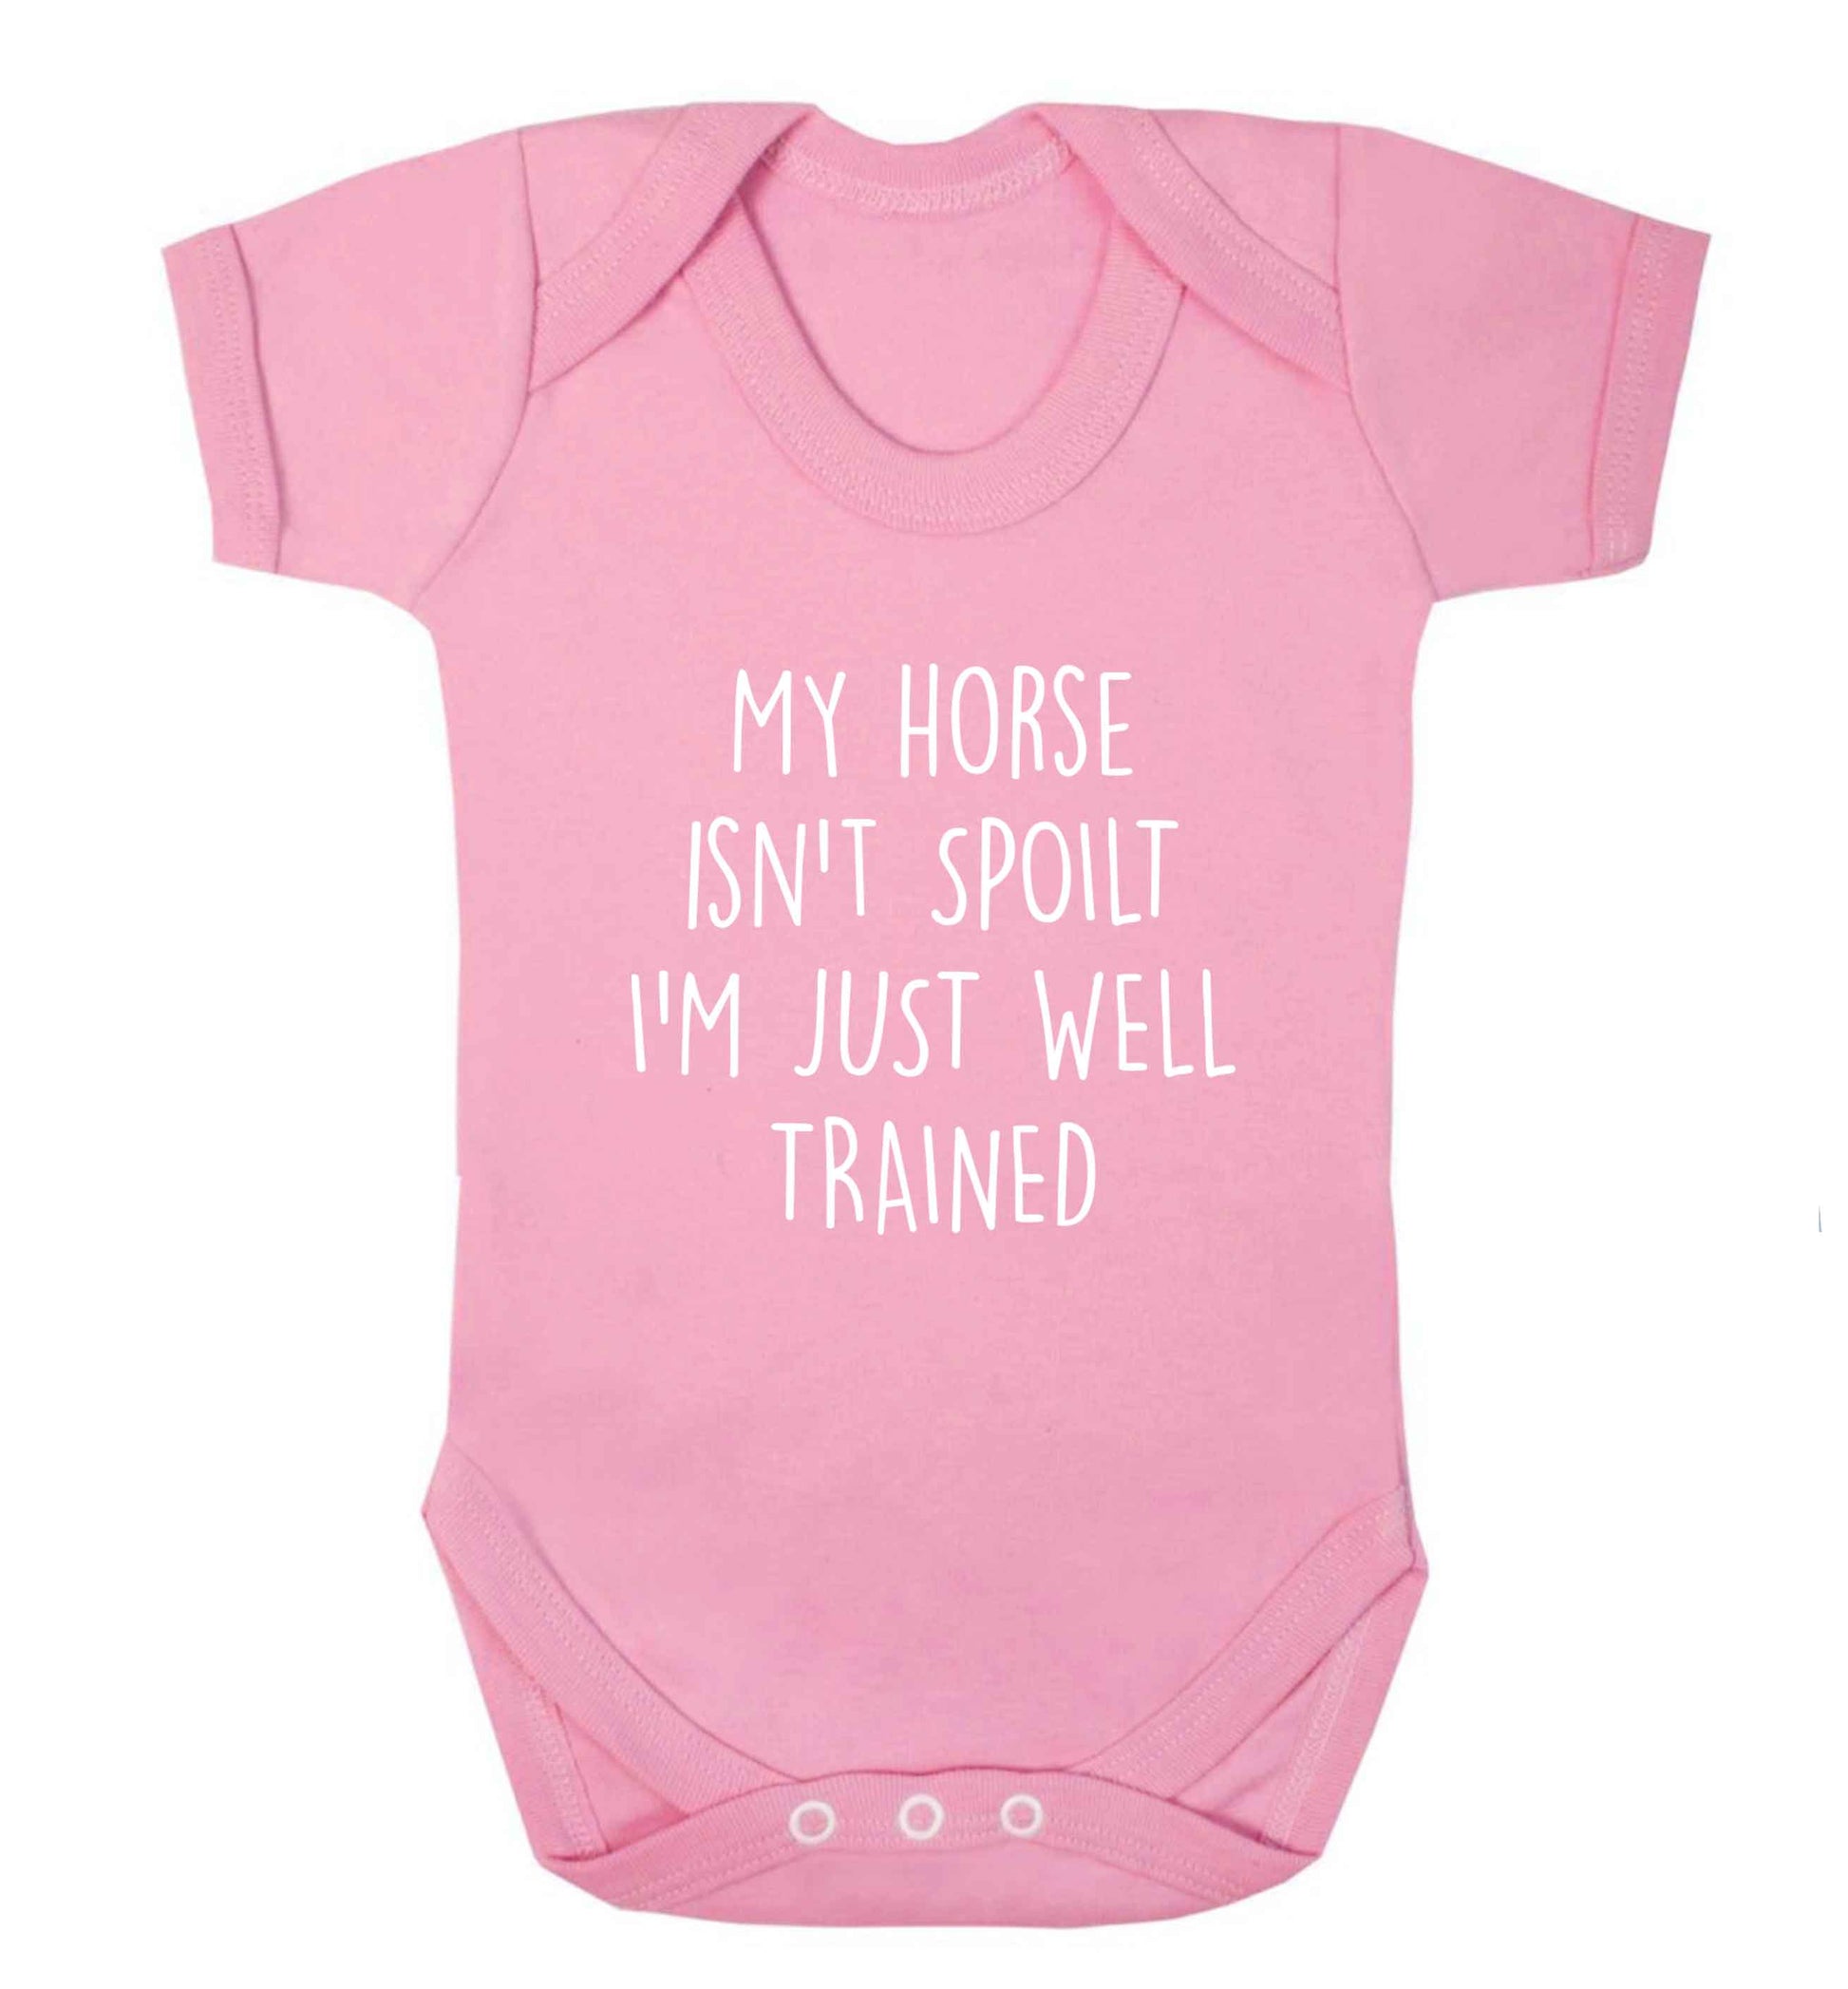 My horse isn't spoilt I'm just well trained baby vest pale pink 18-24 months